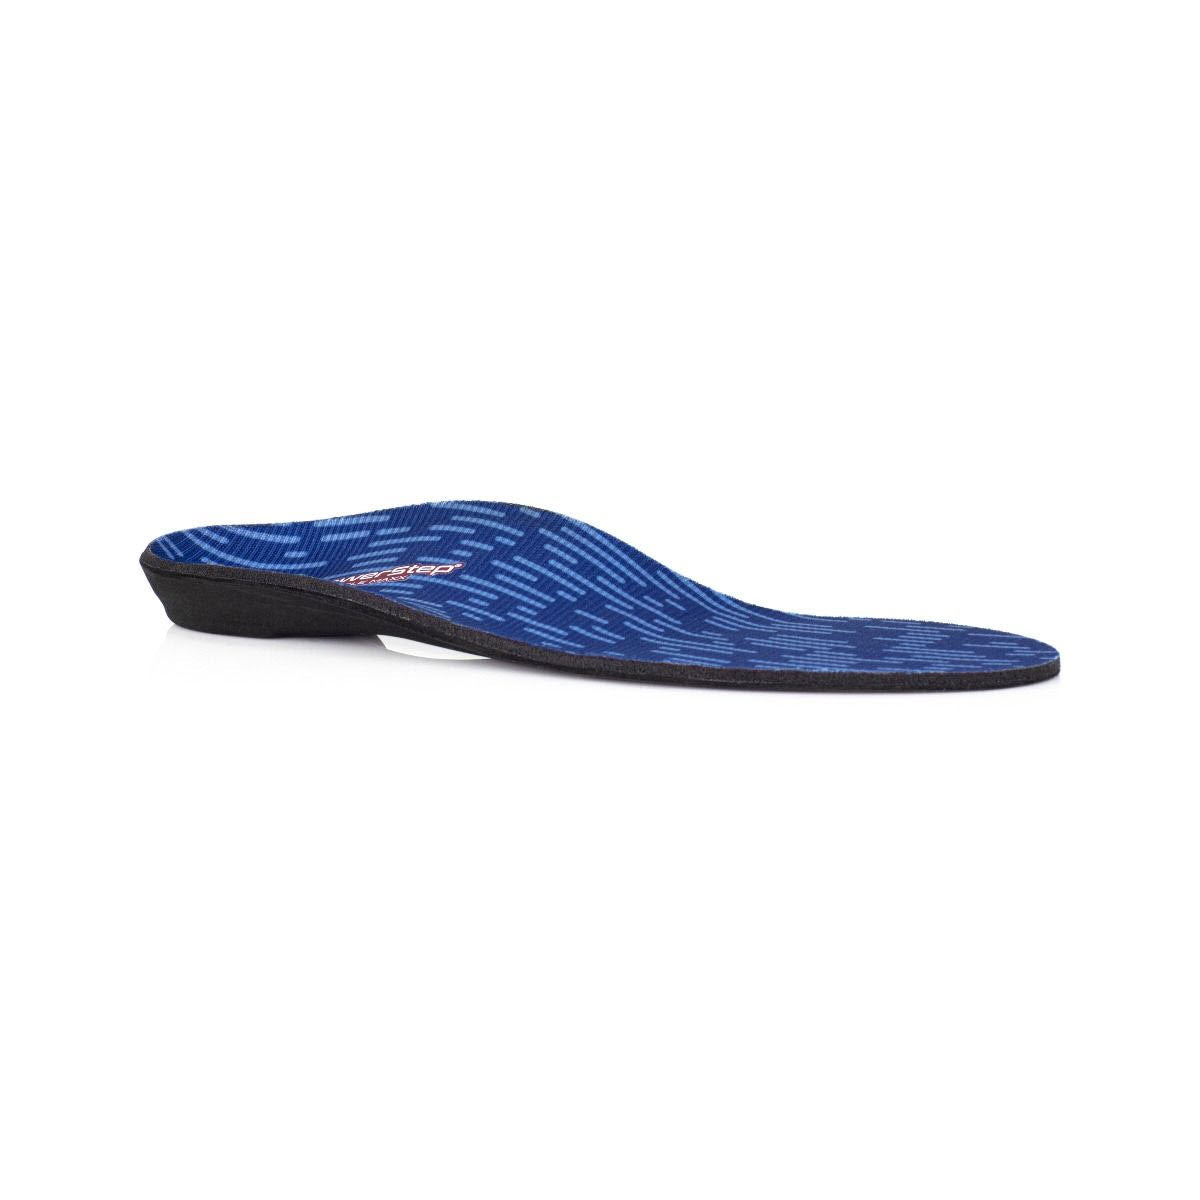 PINNACLE MAXX SUPPORT REPLACEMENT INSOLE